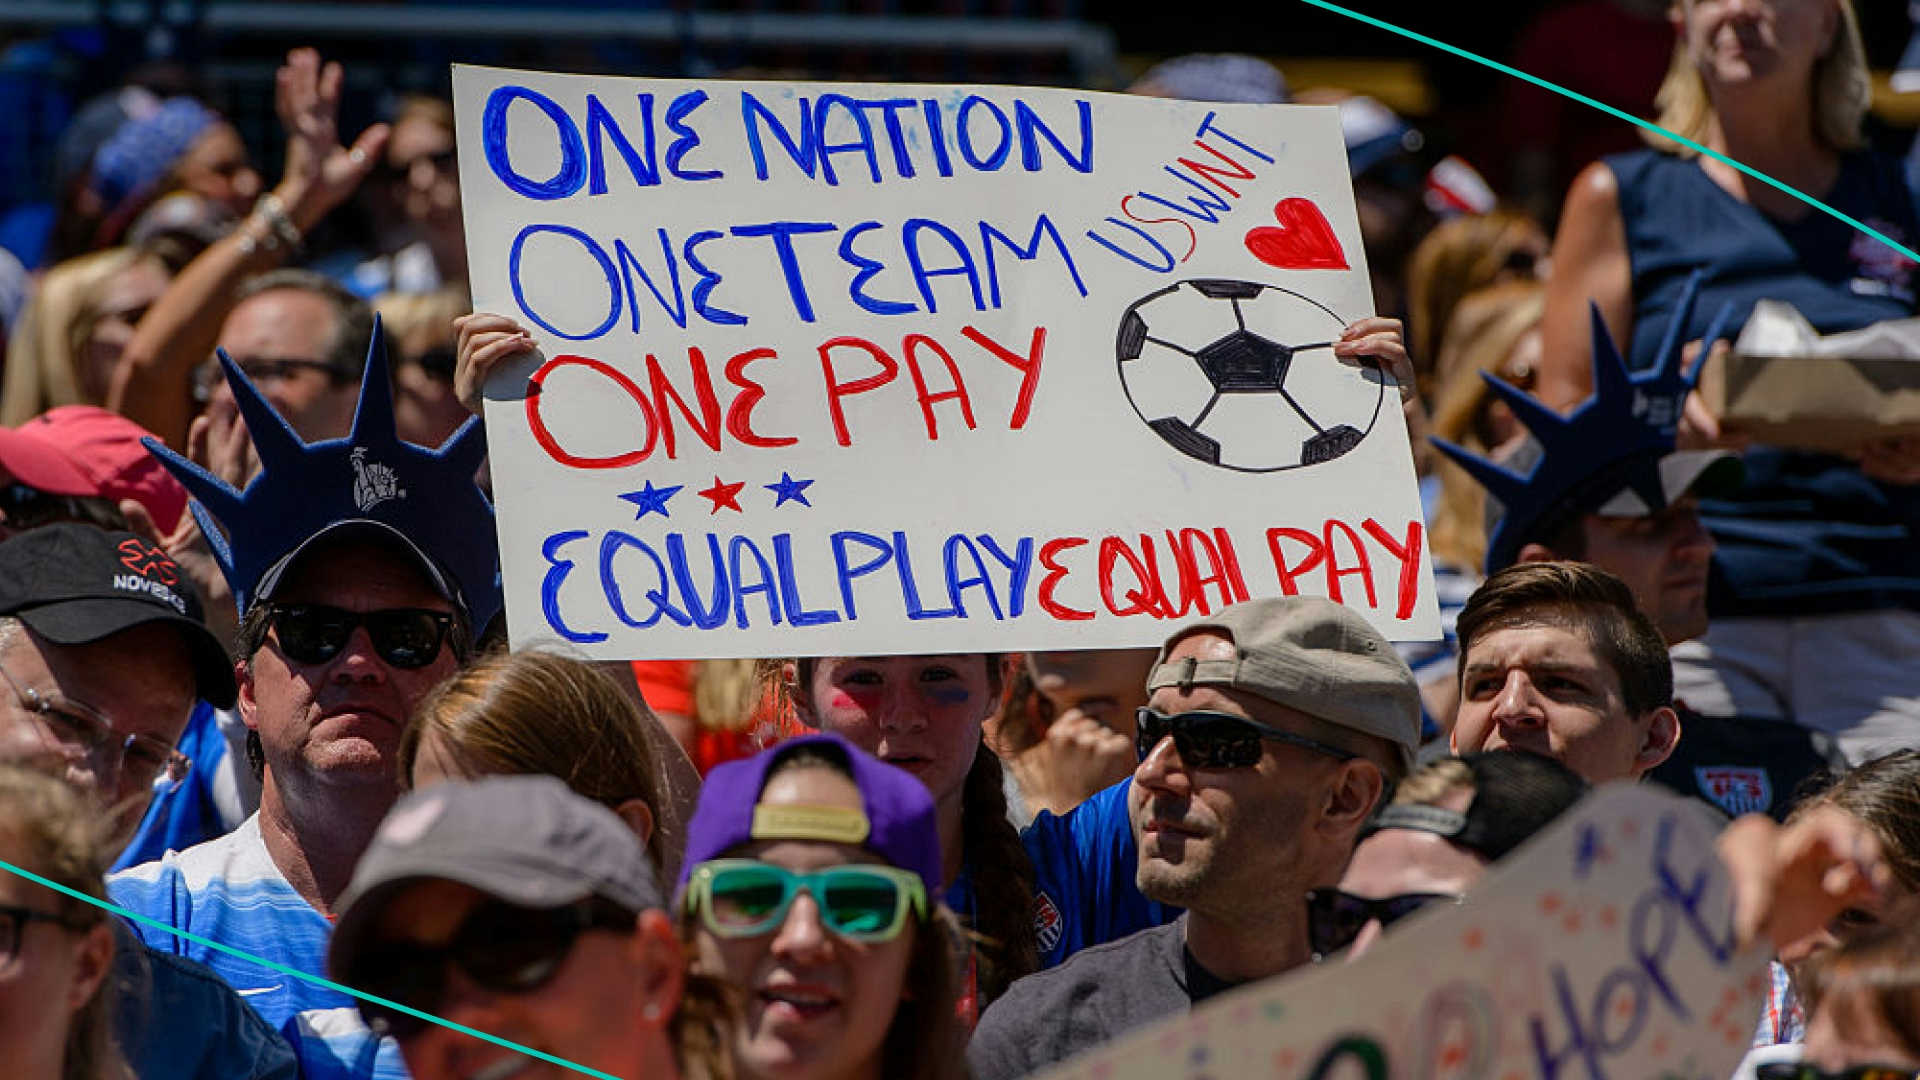 Fan holding equal pay sign at soccer game